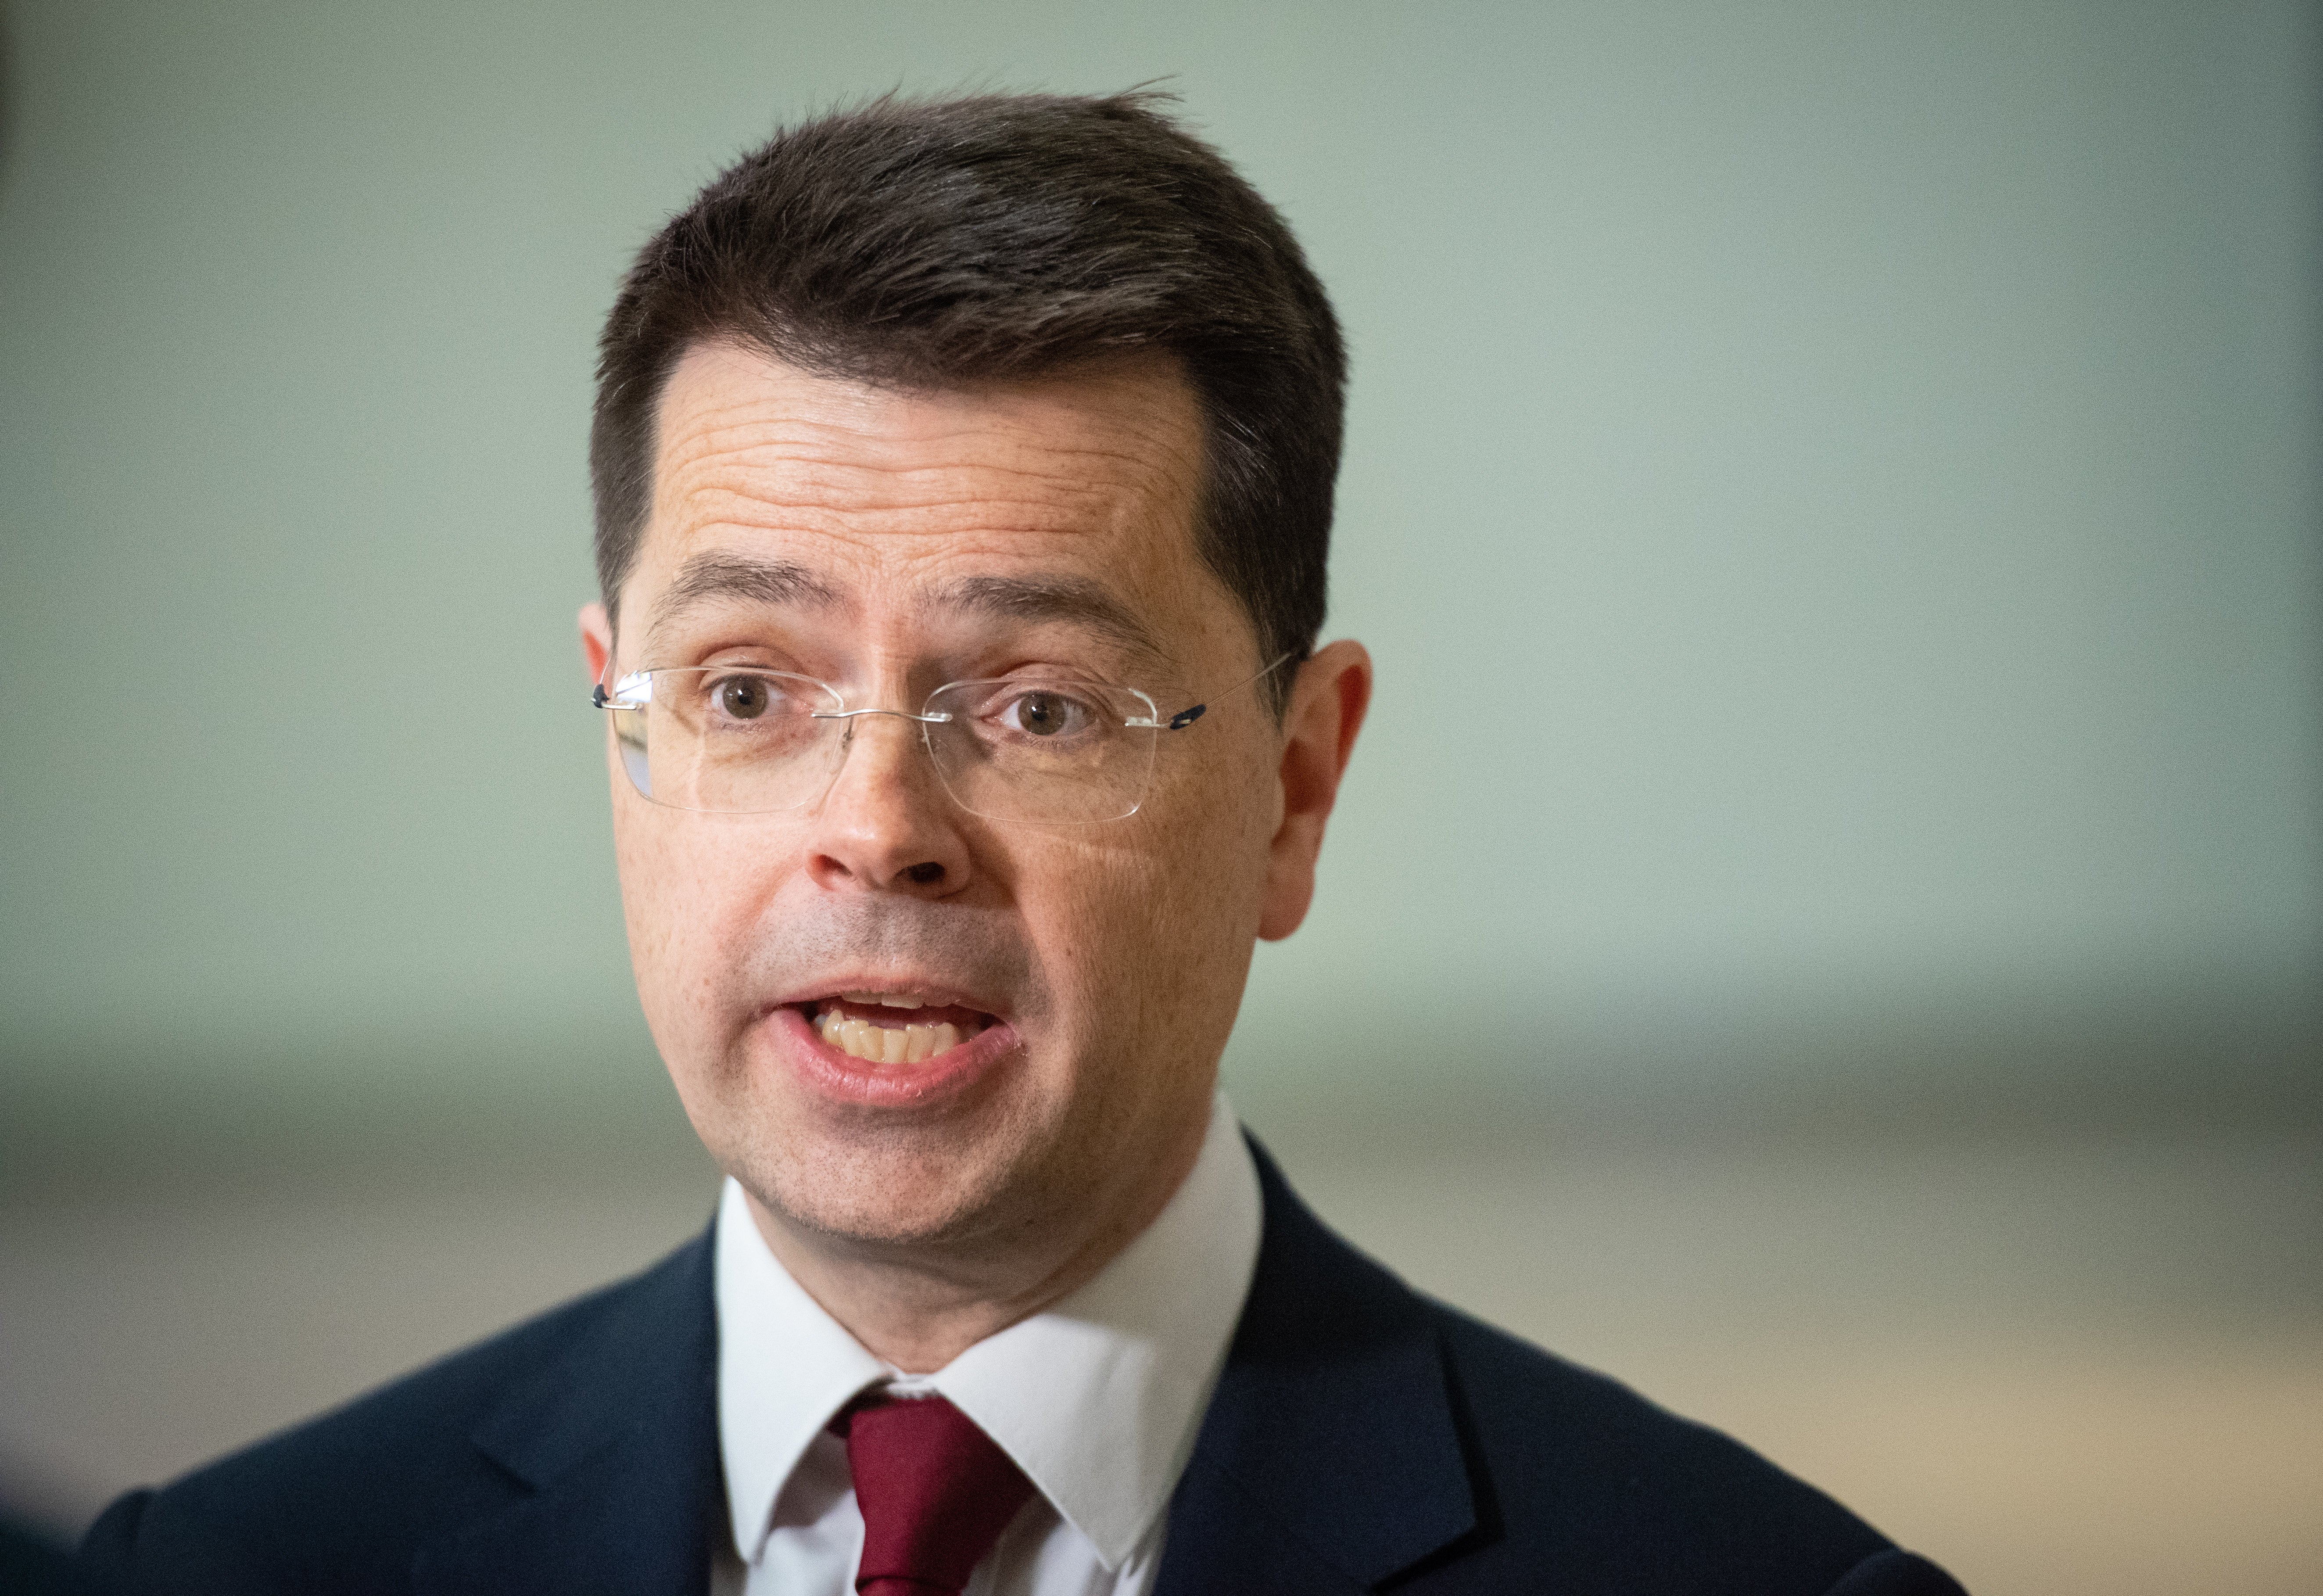 James Brokenshire stepped down from his role as security minister in January after he learned that his cancer had returned